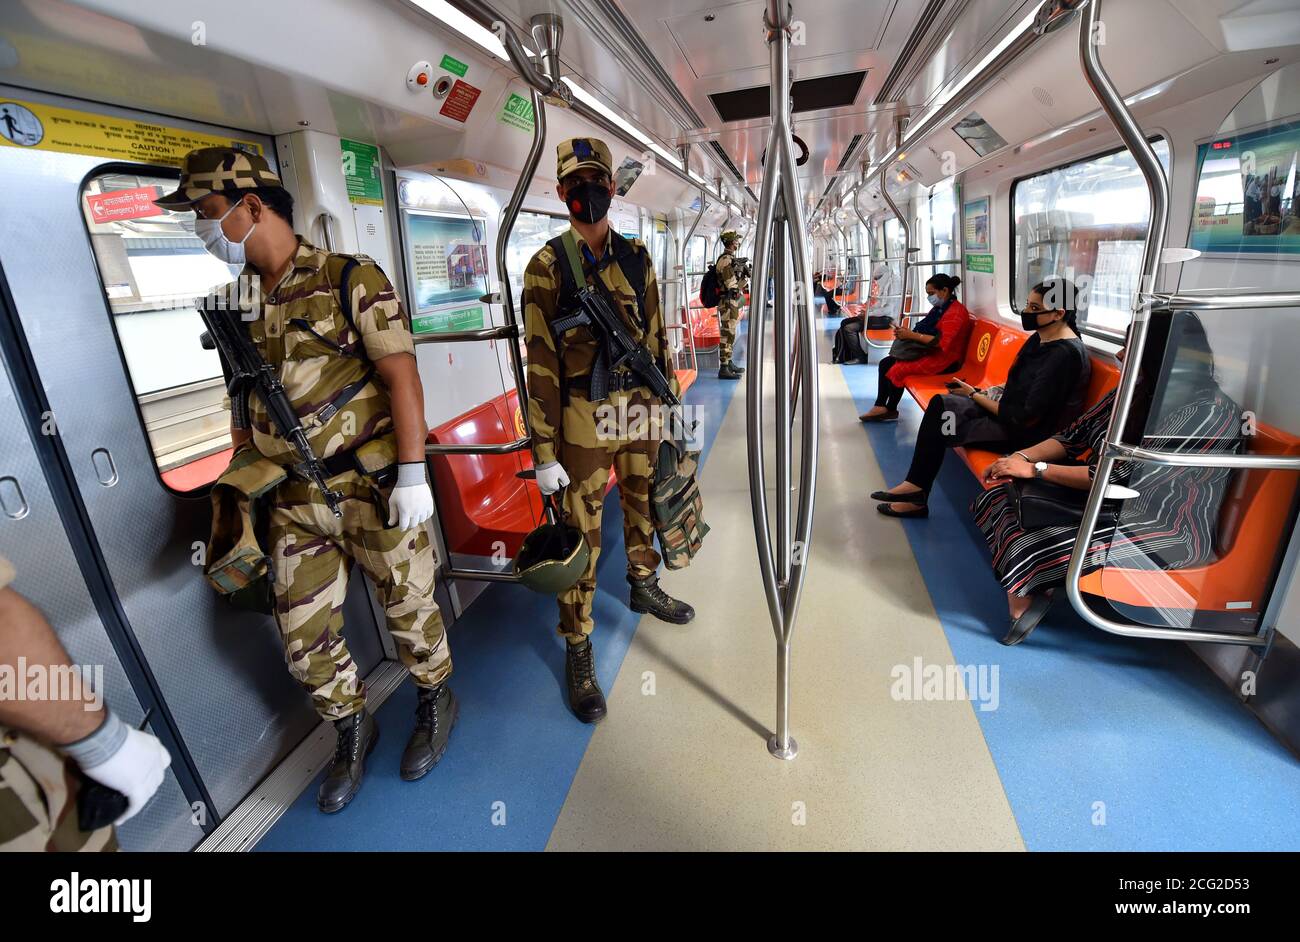 New Delhi, India. 9th September, 2020. Blue and Pink lines of Delhi Metro rail resume services after COVID-19 lockdown. Delhi Metro Commuters and Security persons travel in a metro train after Delhi Metro resumed services with curtailed operation of the Blue line and Pink line Metro, amid the ongoing corona virus pandemic, in New Delhi. India's corona virus cases are now the second-highest in the world and only behind the United States. Credit: PRASOU/Alamy Live News Stock Photo